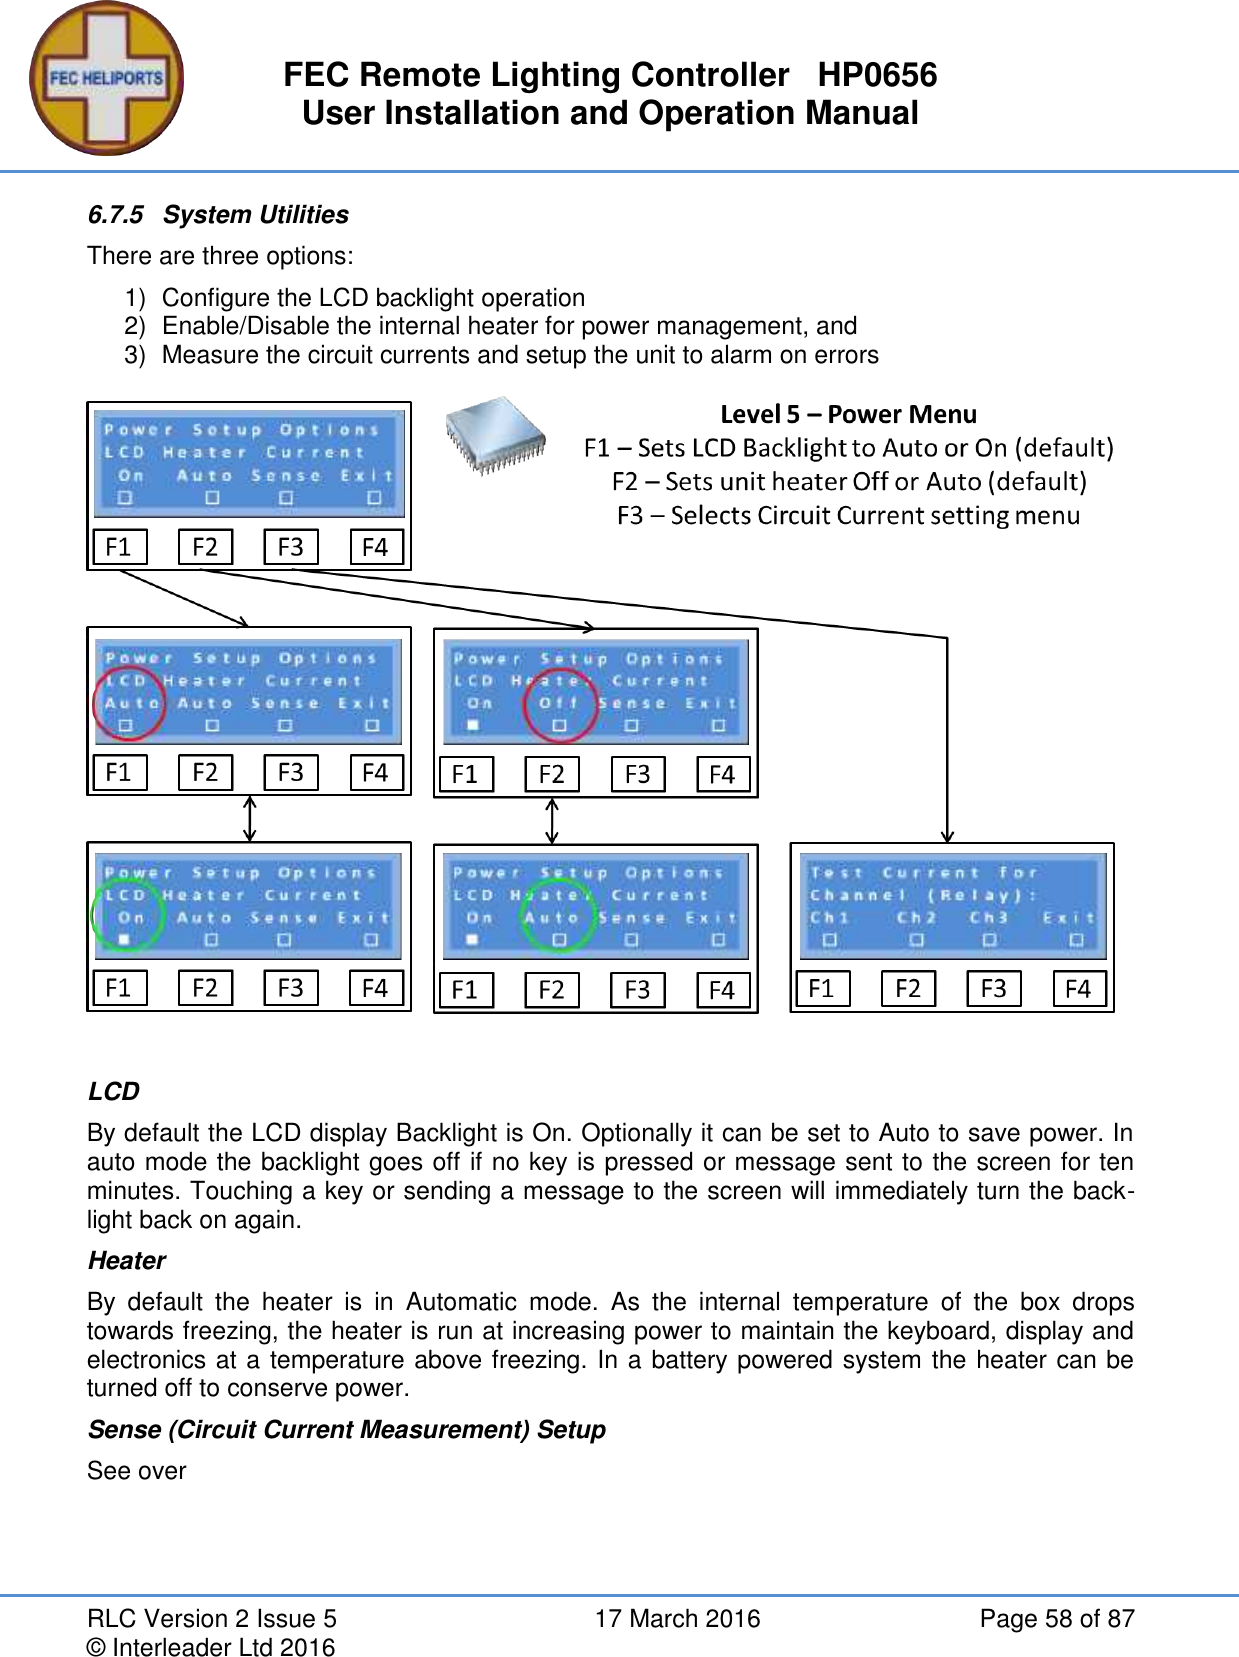 FEC Remote Lighting Controller   HP0656 User Installation and Operation Manual RLC Version 2 Issue 5  17 March 2016  Page 58 of 87 © Interleader Ltd 2016 6.7.5  System Utilities There are three options: 1)  Configure the LCD backlight operation 2)  Enable/Disable the internal heater for power management, and 3)  Measure the circuit currents and setup the unit to alarm on errors    LCD By default the LCD display Backlight is On. Optionally it can be set to Auto to save power. In auto mode the backlight goes off if no key is pressed or message sent to the screen for ten minutes. Touching a key or sending a message to the screen will immediately turn the back-light back on again. Heater By  default  the  heater  is  in  Automatic  mode.  As  the  internal  temperature  of  the  box  drops towards freezing, the heater is run at increasing power to maintain the keyboard, display and electronics at a temperature above freezing. In a battery powered system the heater can be turned off to conserve power. Sense (Circuit Current Measurement) Setup See over   